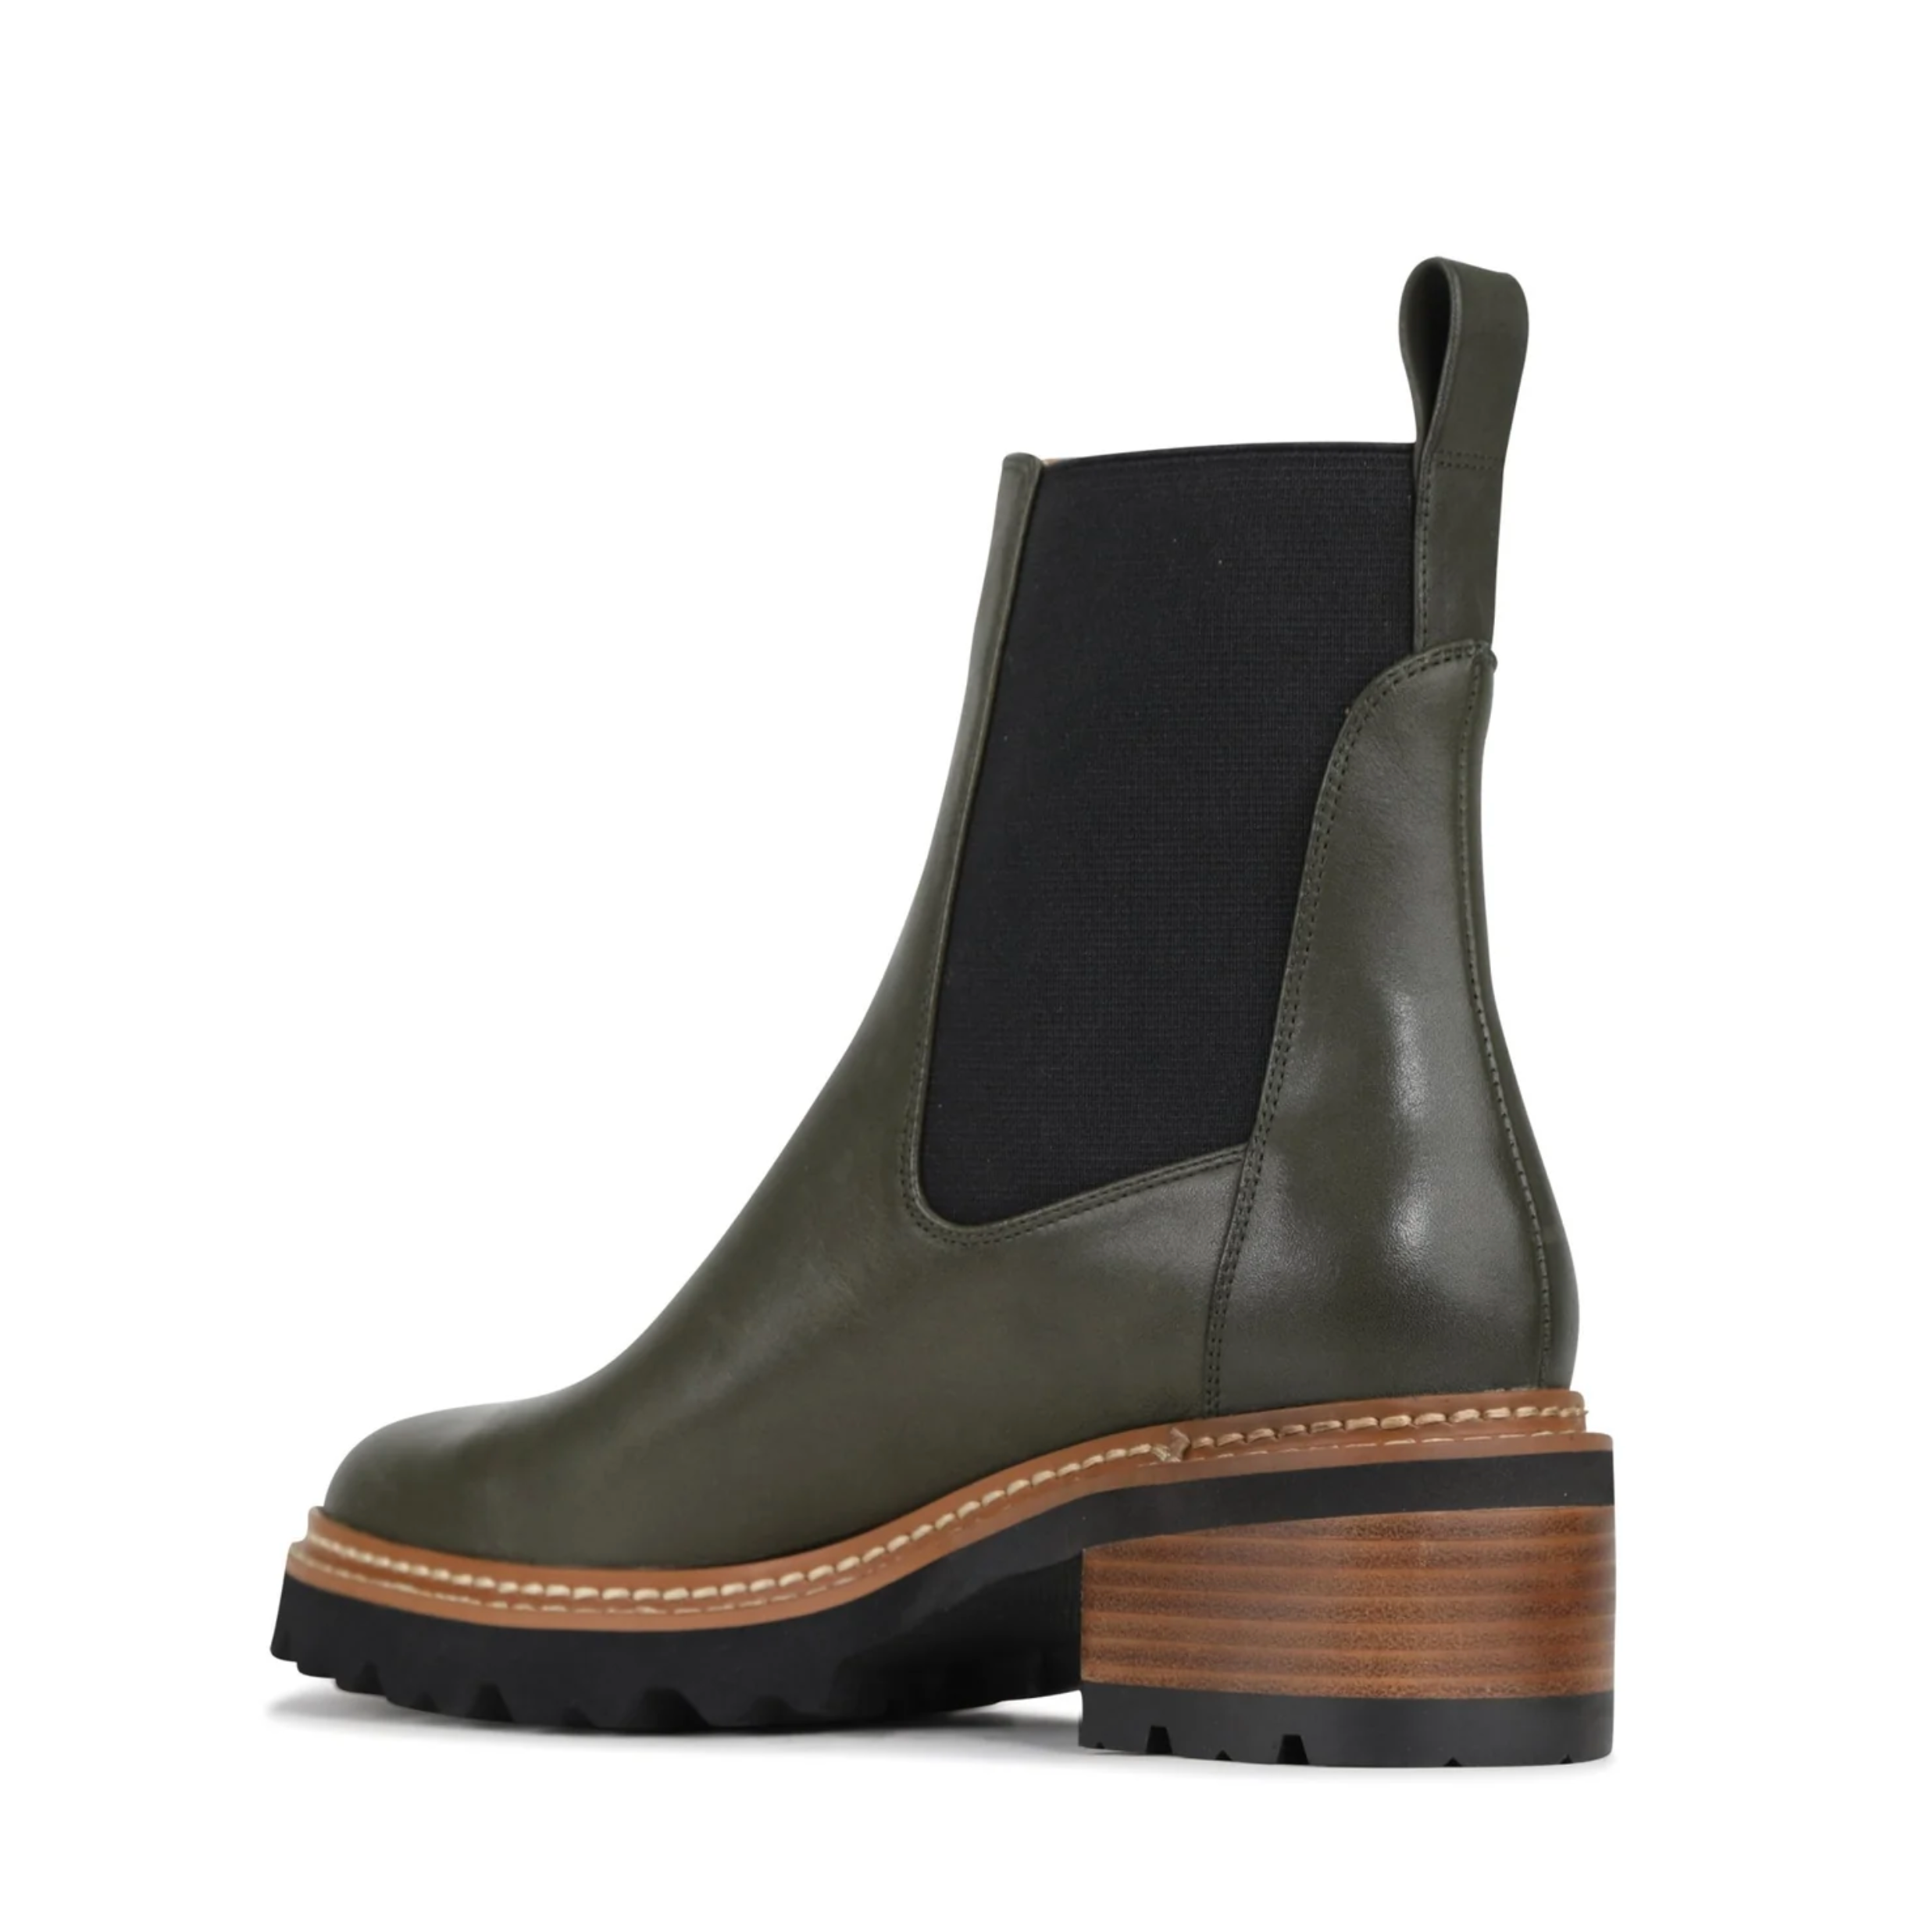 EOS LINEAR DARK OLIVE Women Boots - Zeke Collection NZ